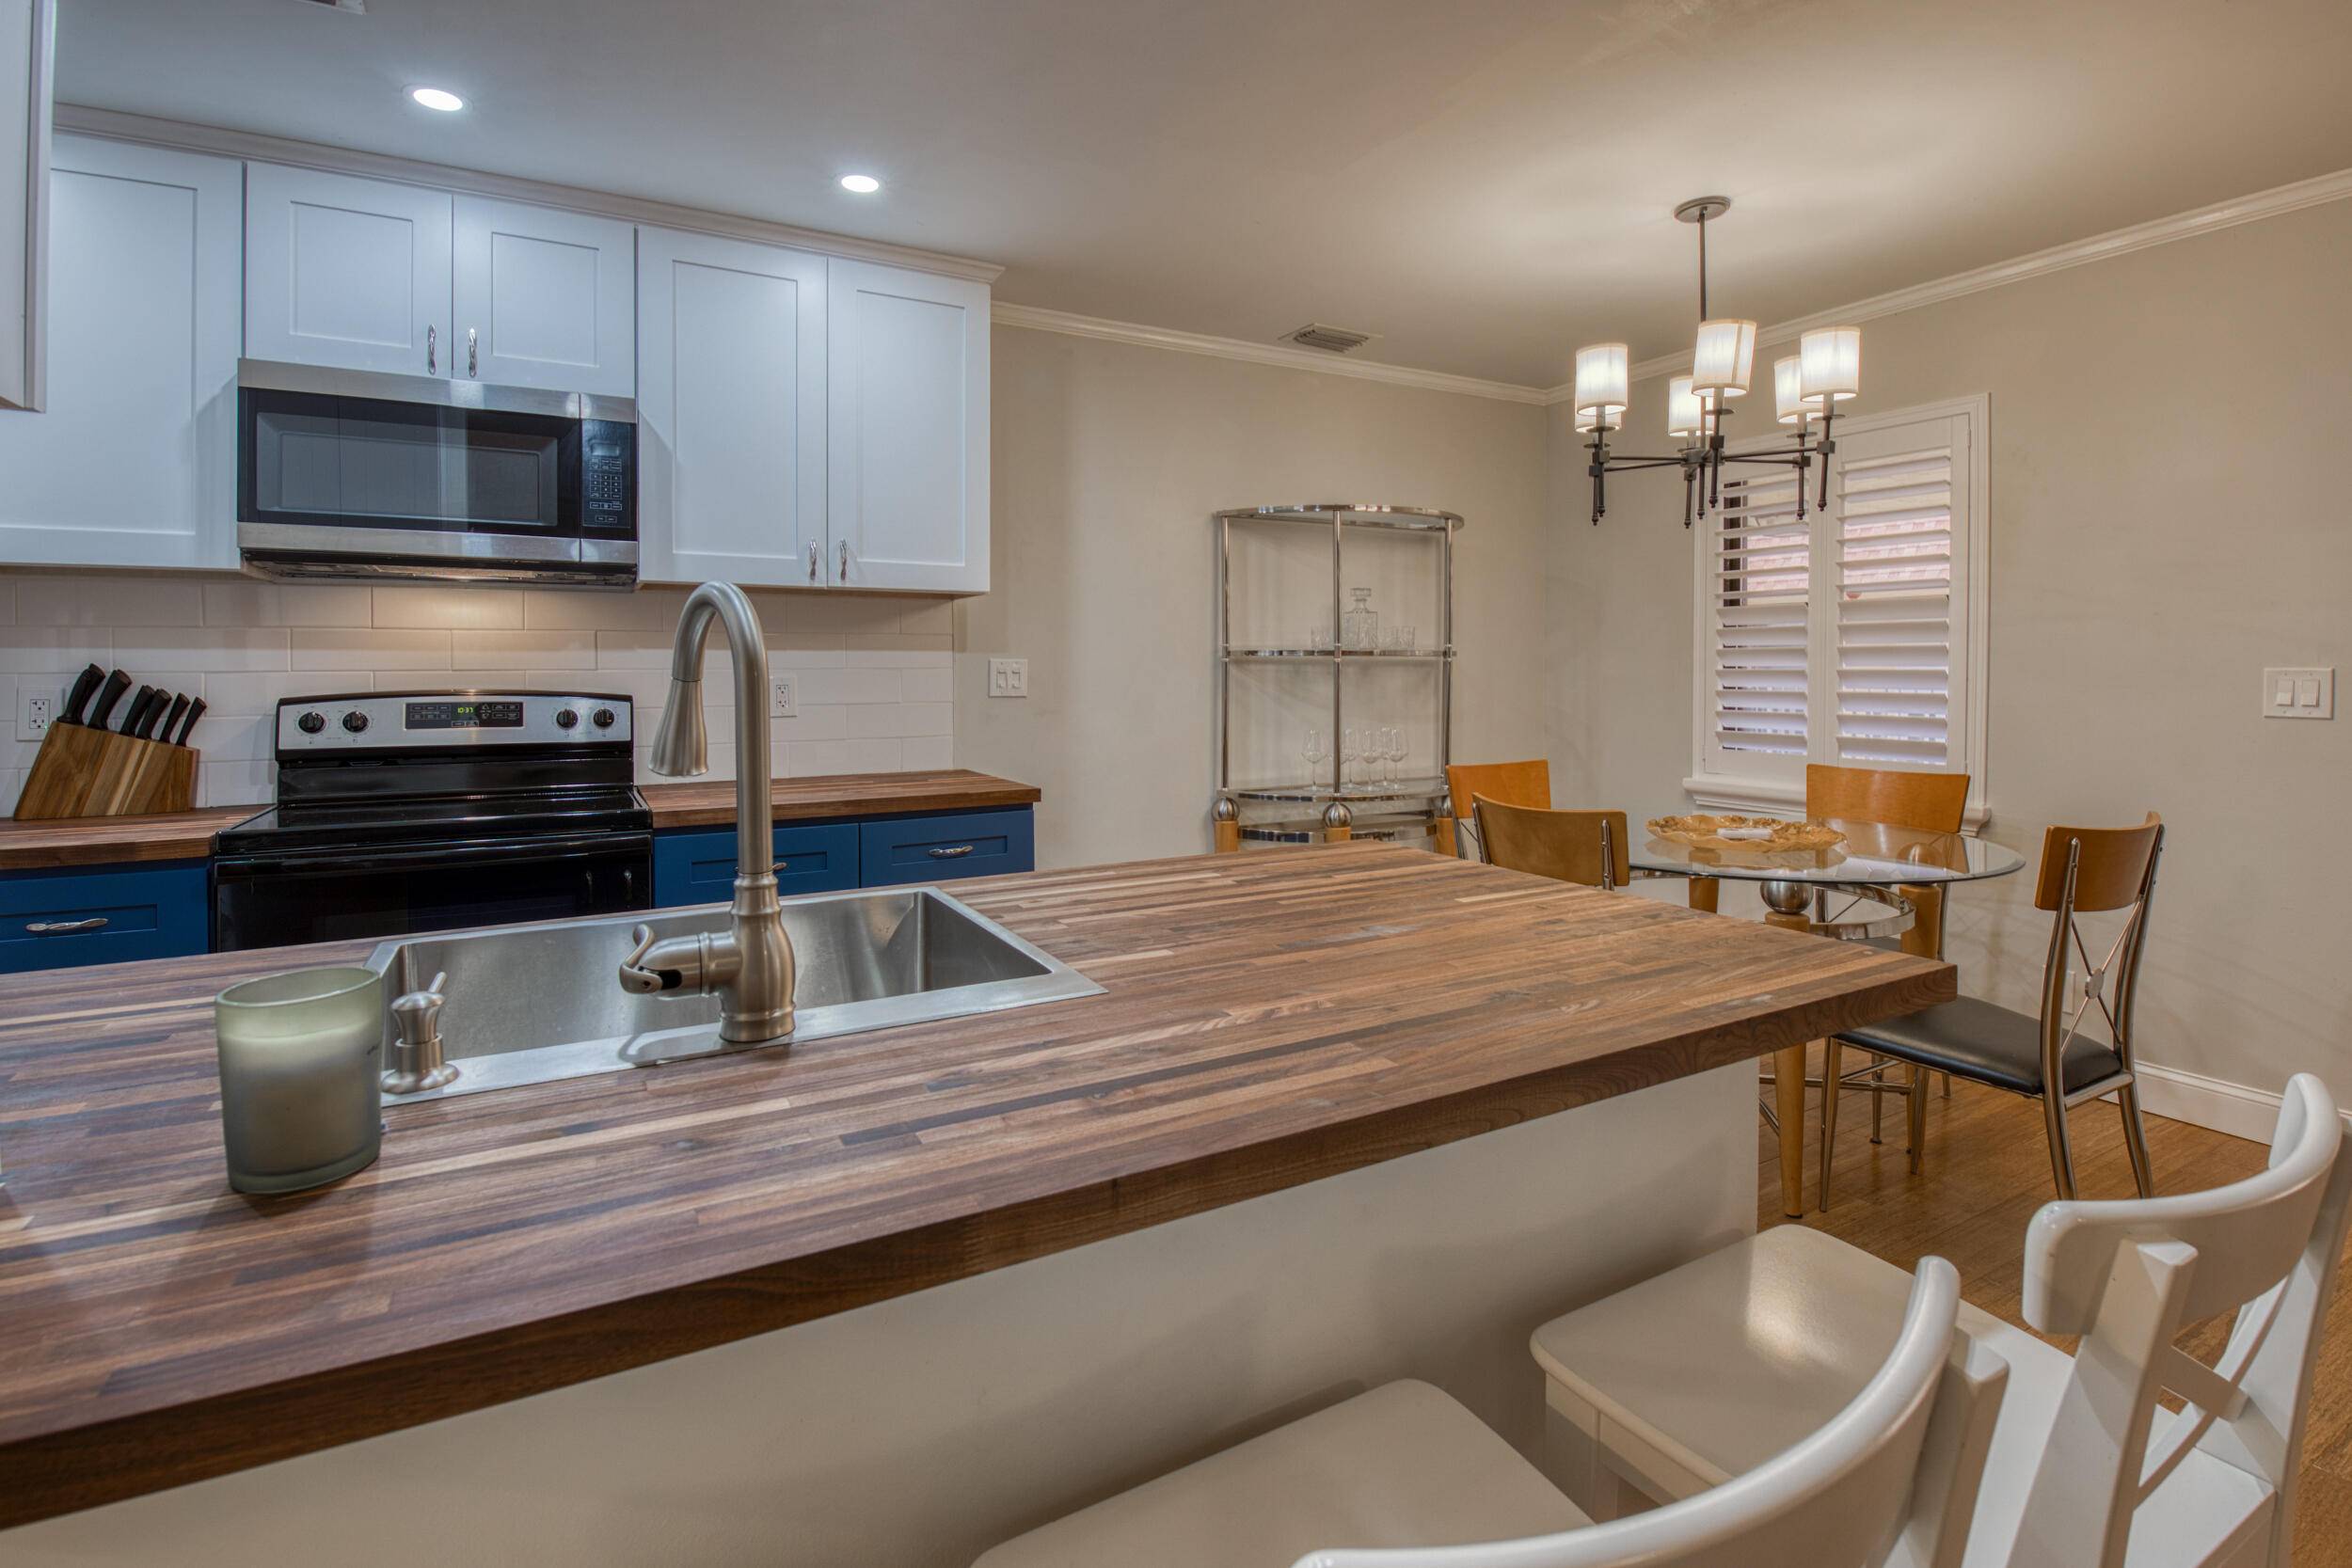 Lush and Beautiful updated 2 2 with laundry insideHugh open entertaining kitchen with dining area, living room spills onto the covered lanai and many more features to discover also plenty ...